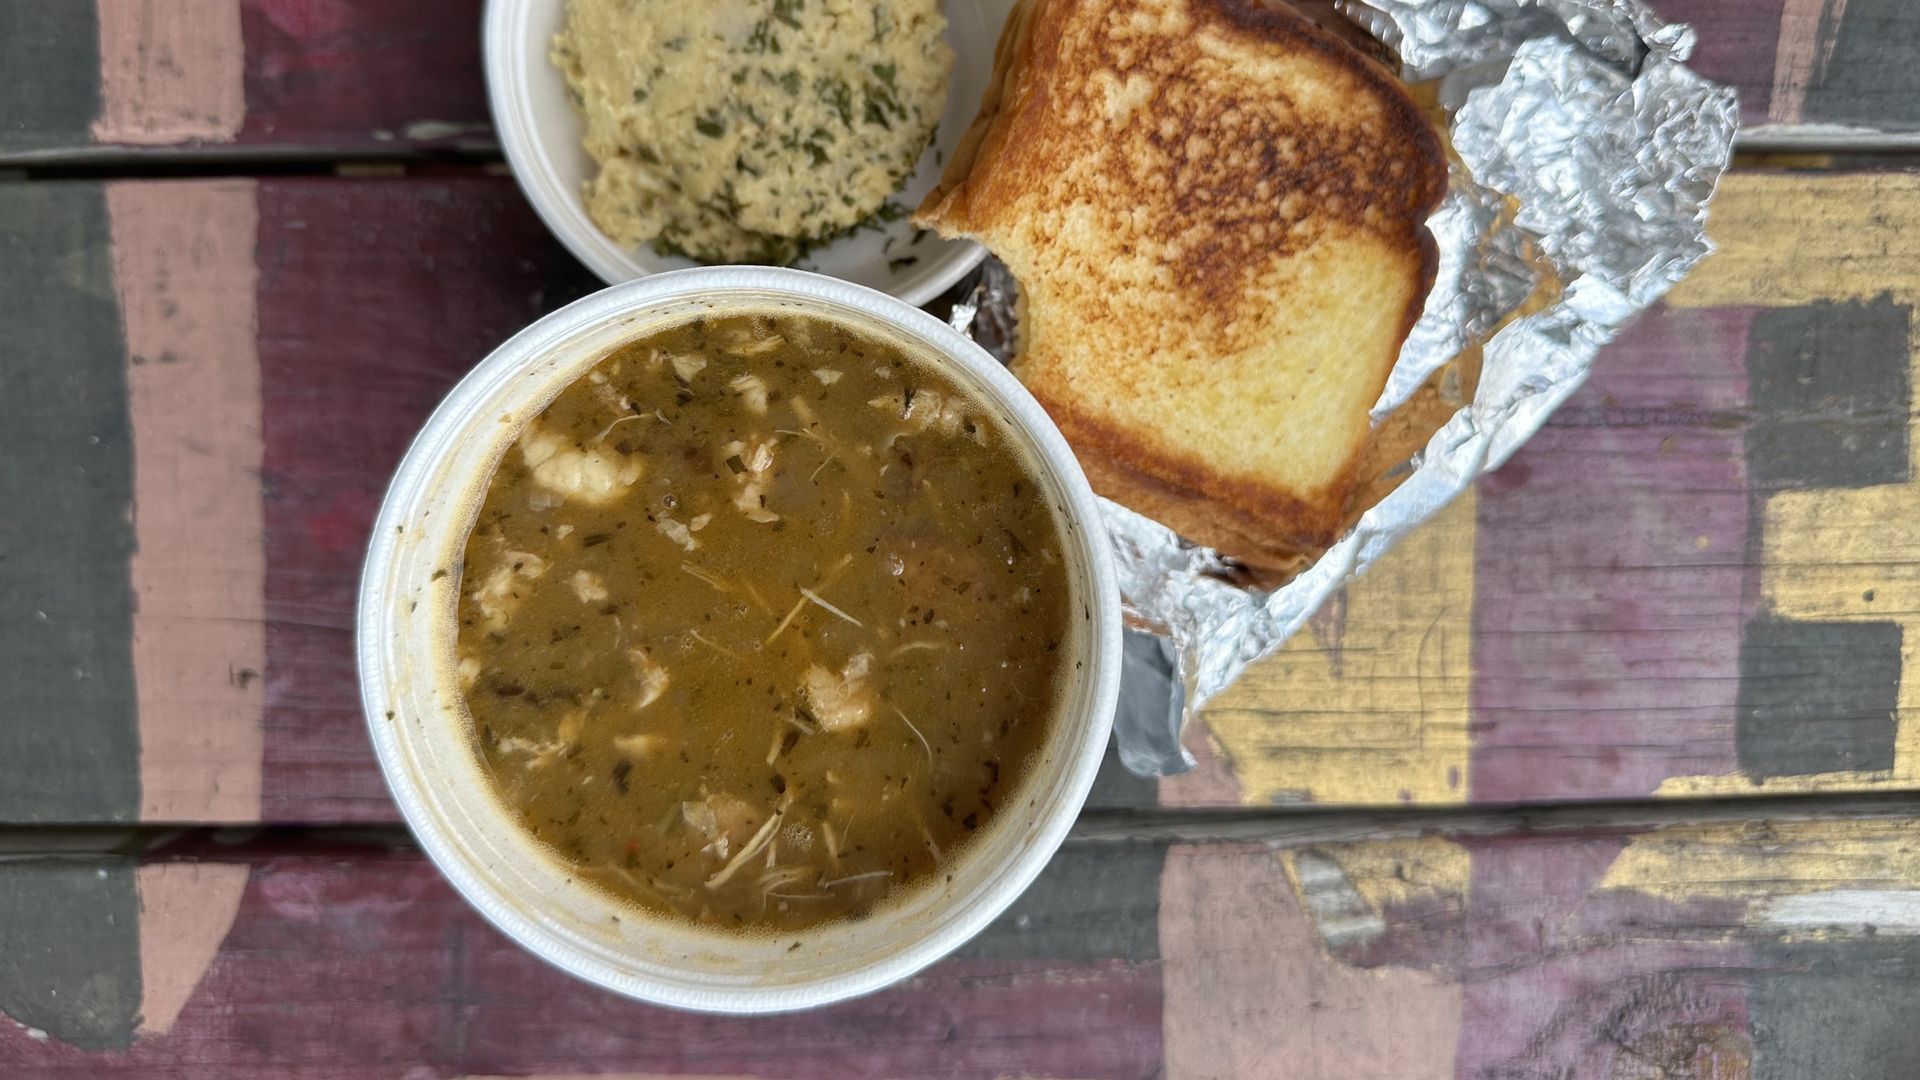 A table is set with a styrofoam bowls of gumbo and potato salad, and a grilled cheese sandwich on a piece of aluminum foil. The sandwich has had a bite taken out of it.